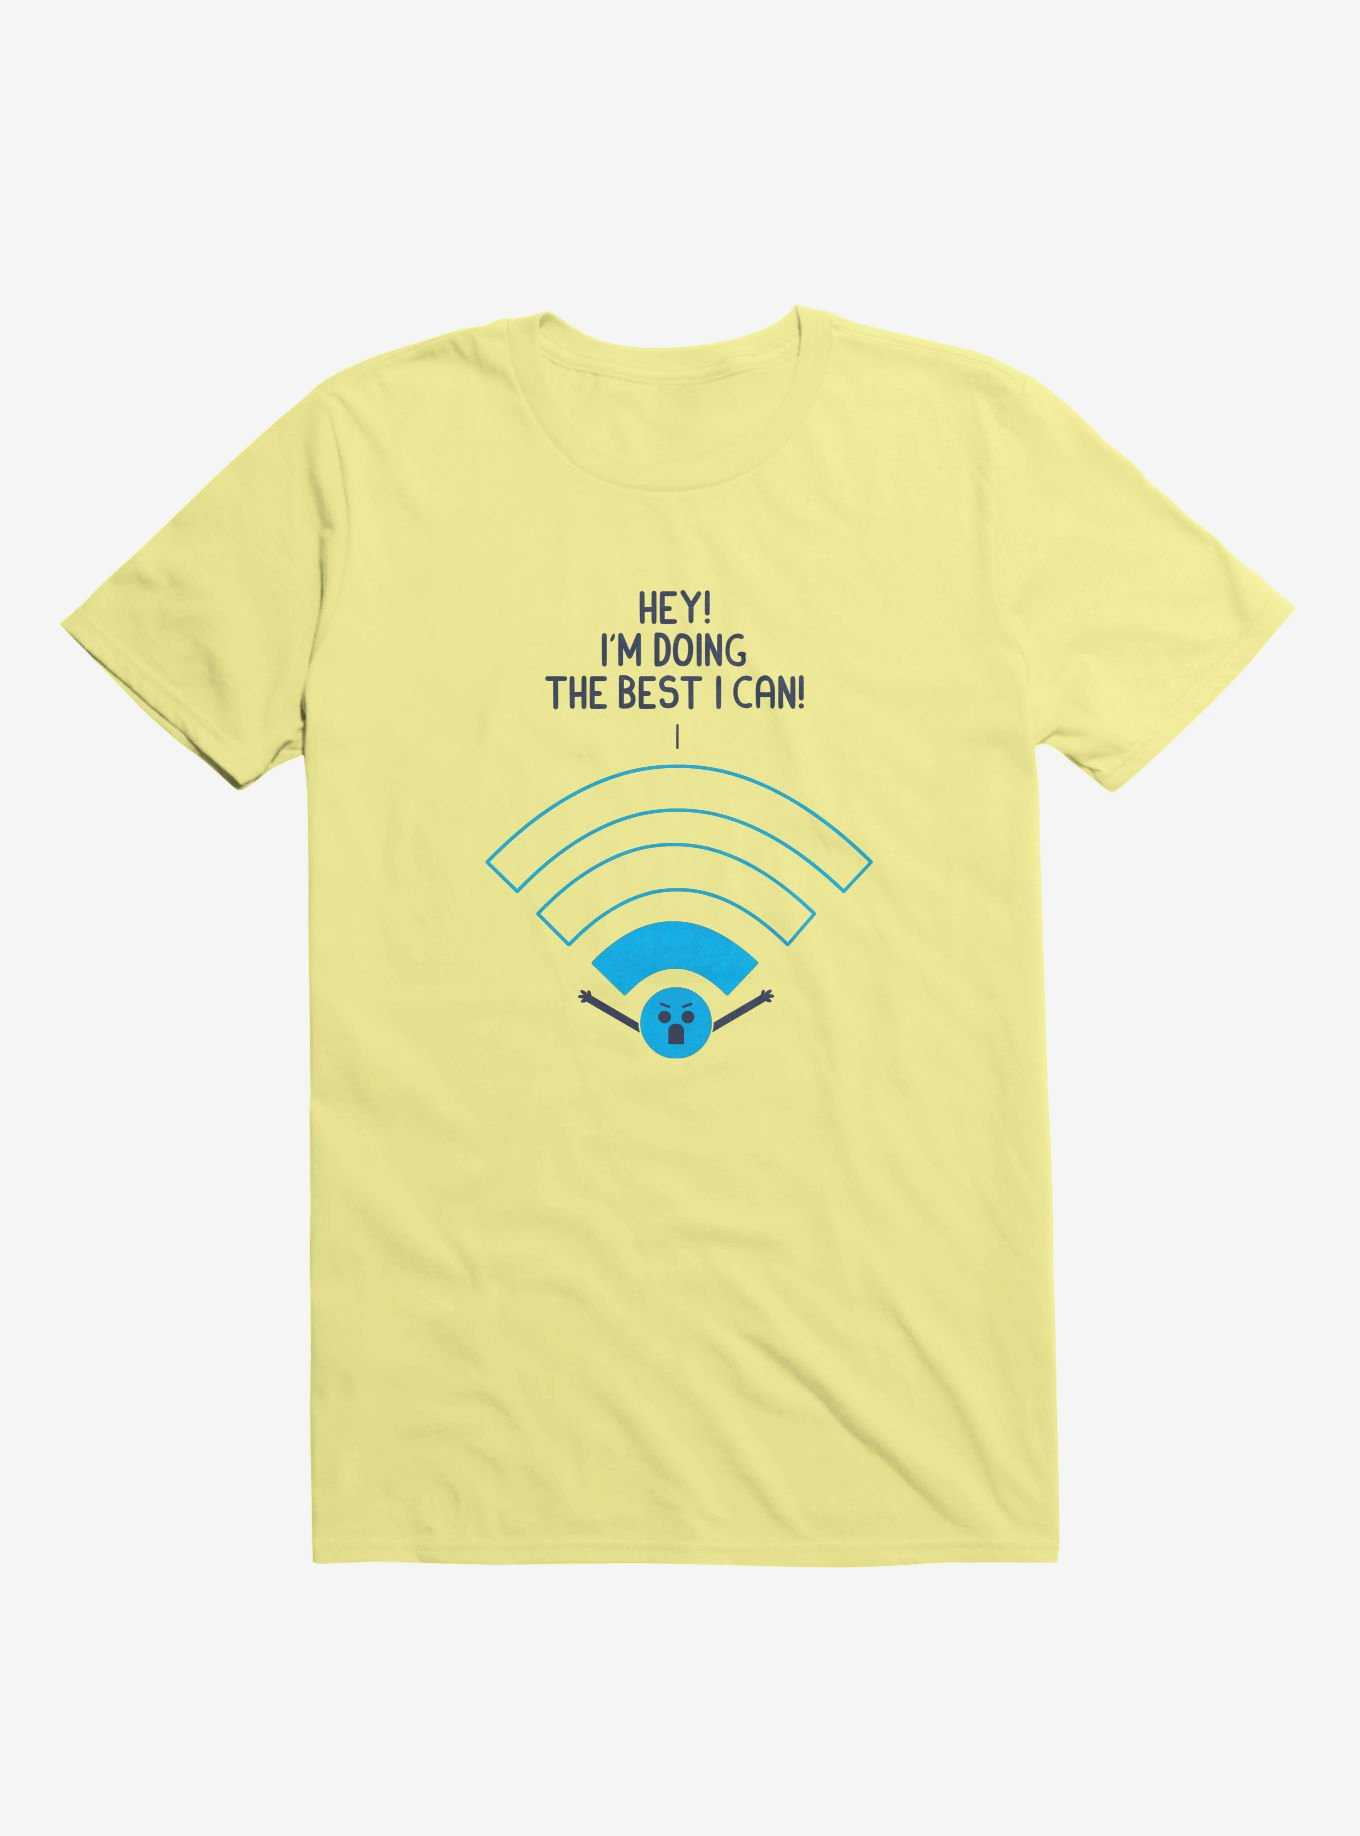 Angry Wi-Fi Hey! I'm Doing The Best I Can! Corn Silk Yellow T-Shirt, , hi-res